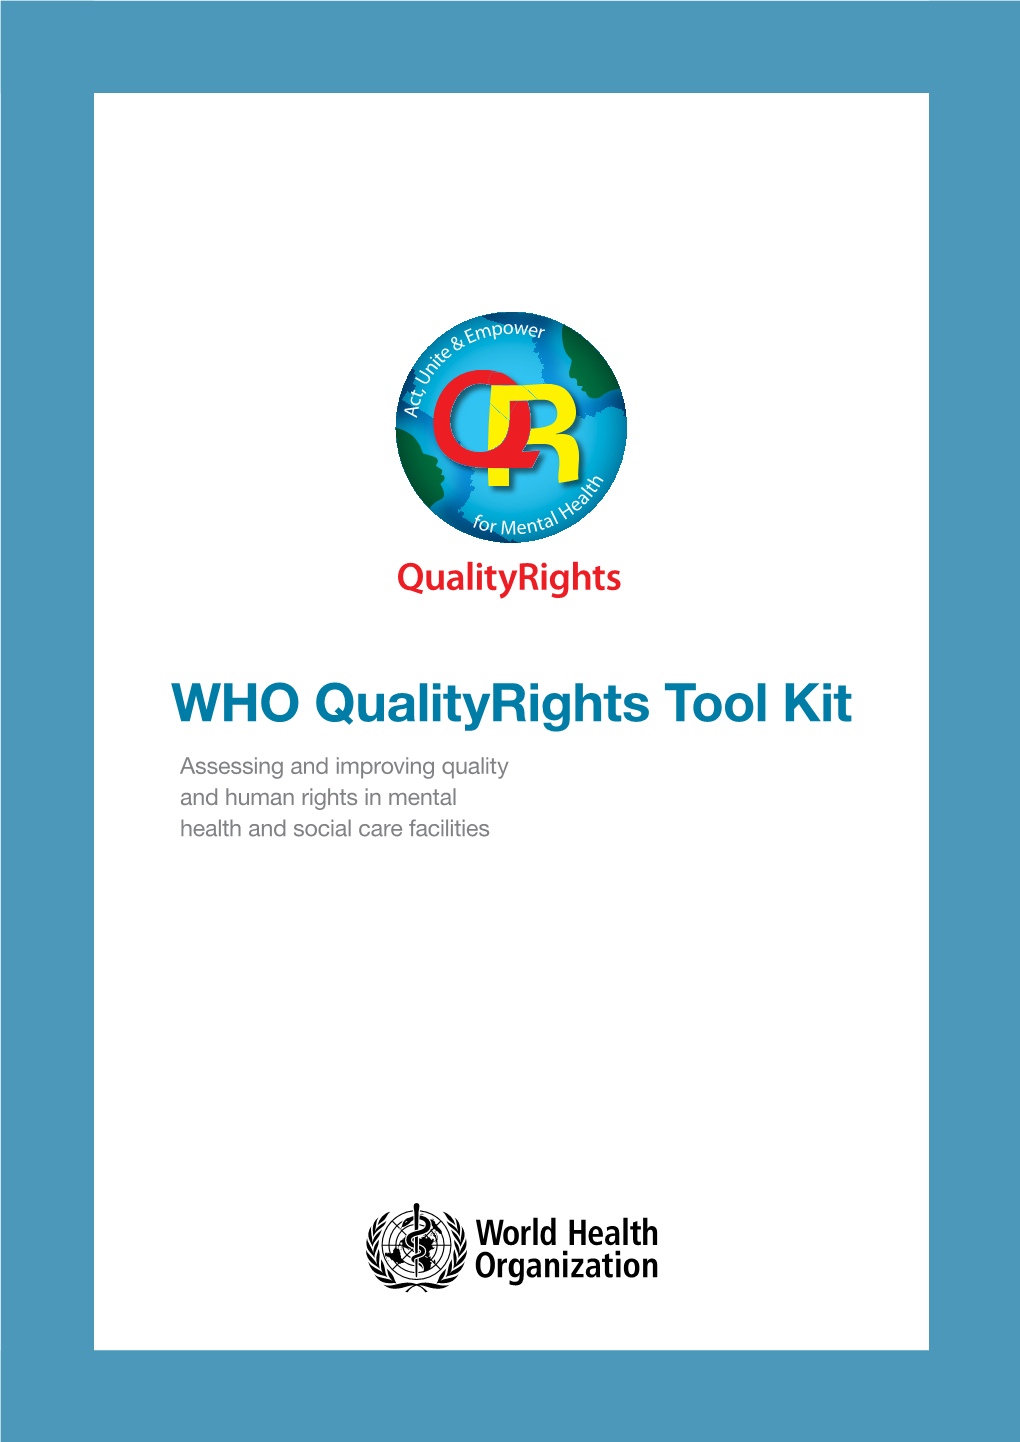 WHO Qualityrights Tool